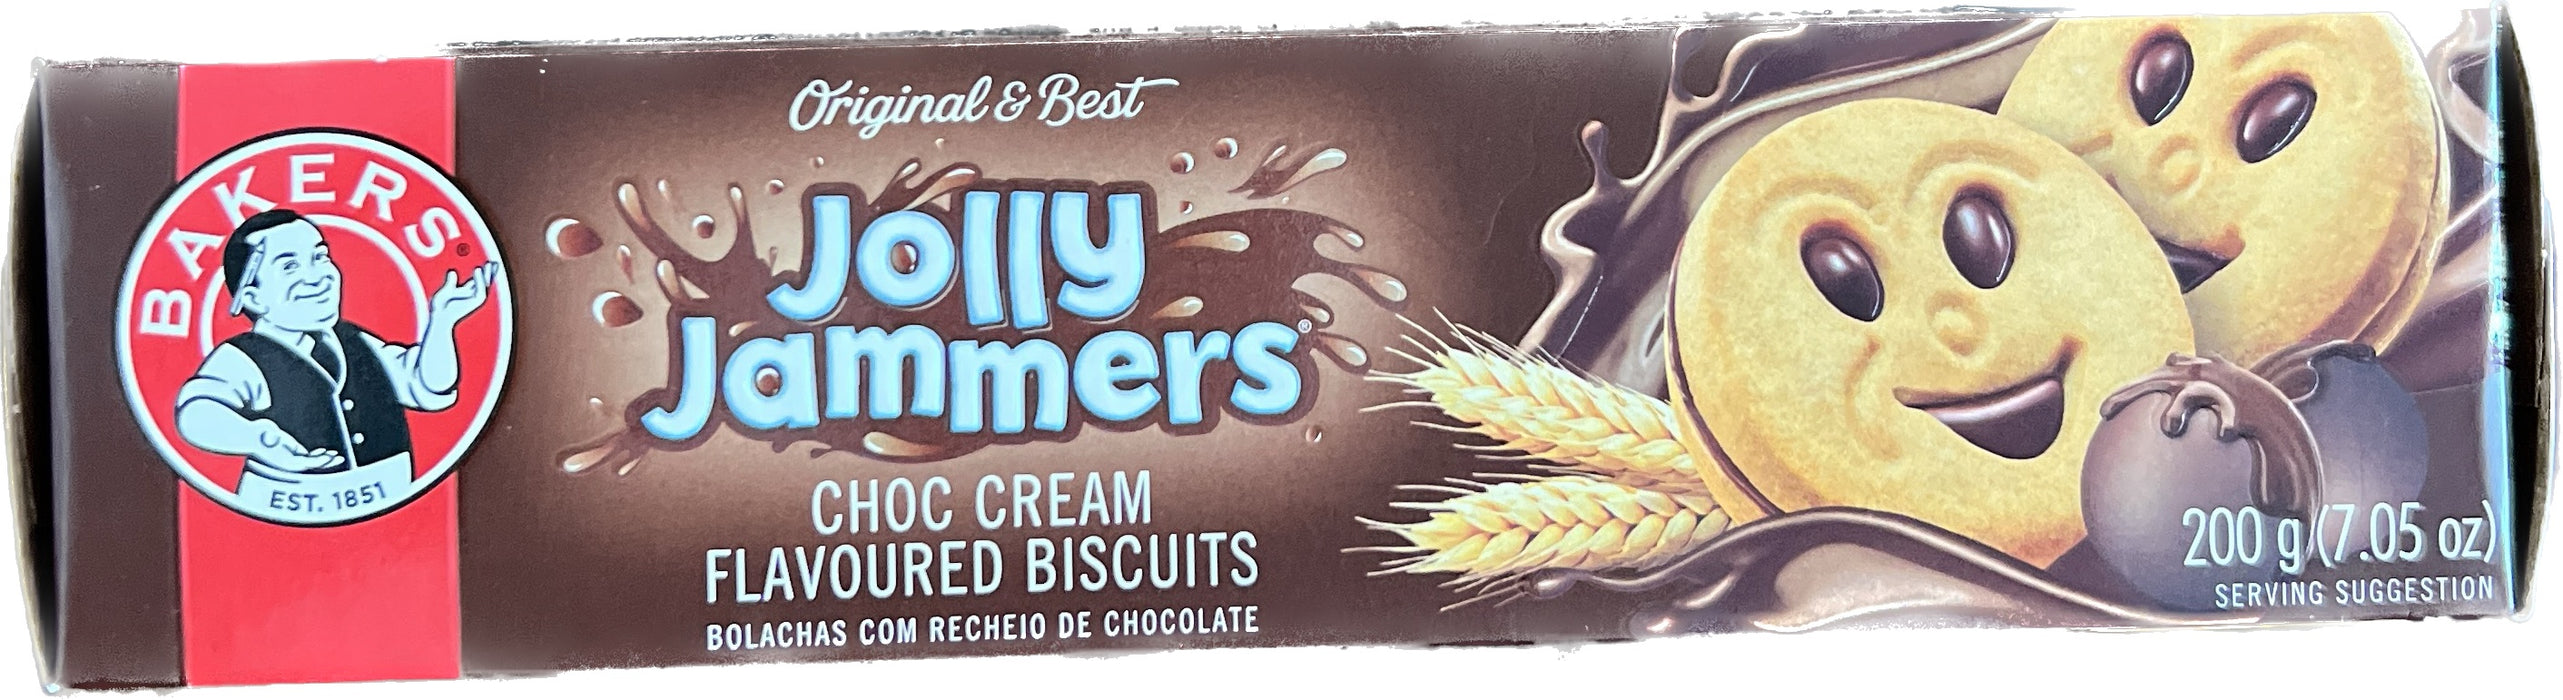 Jolly Jammers chocolate